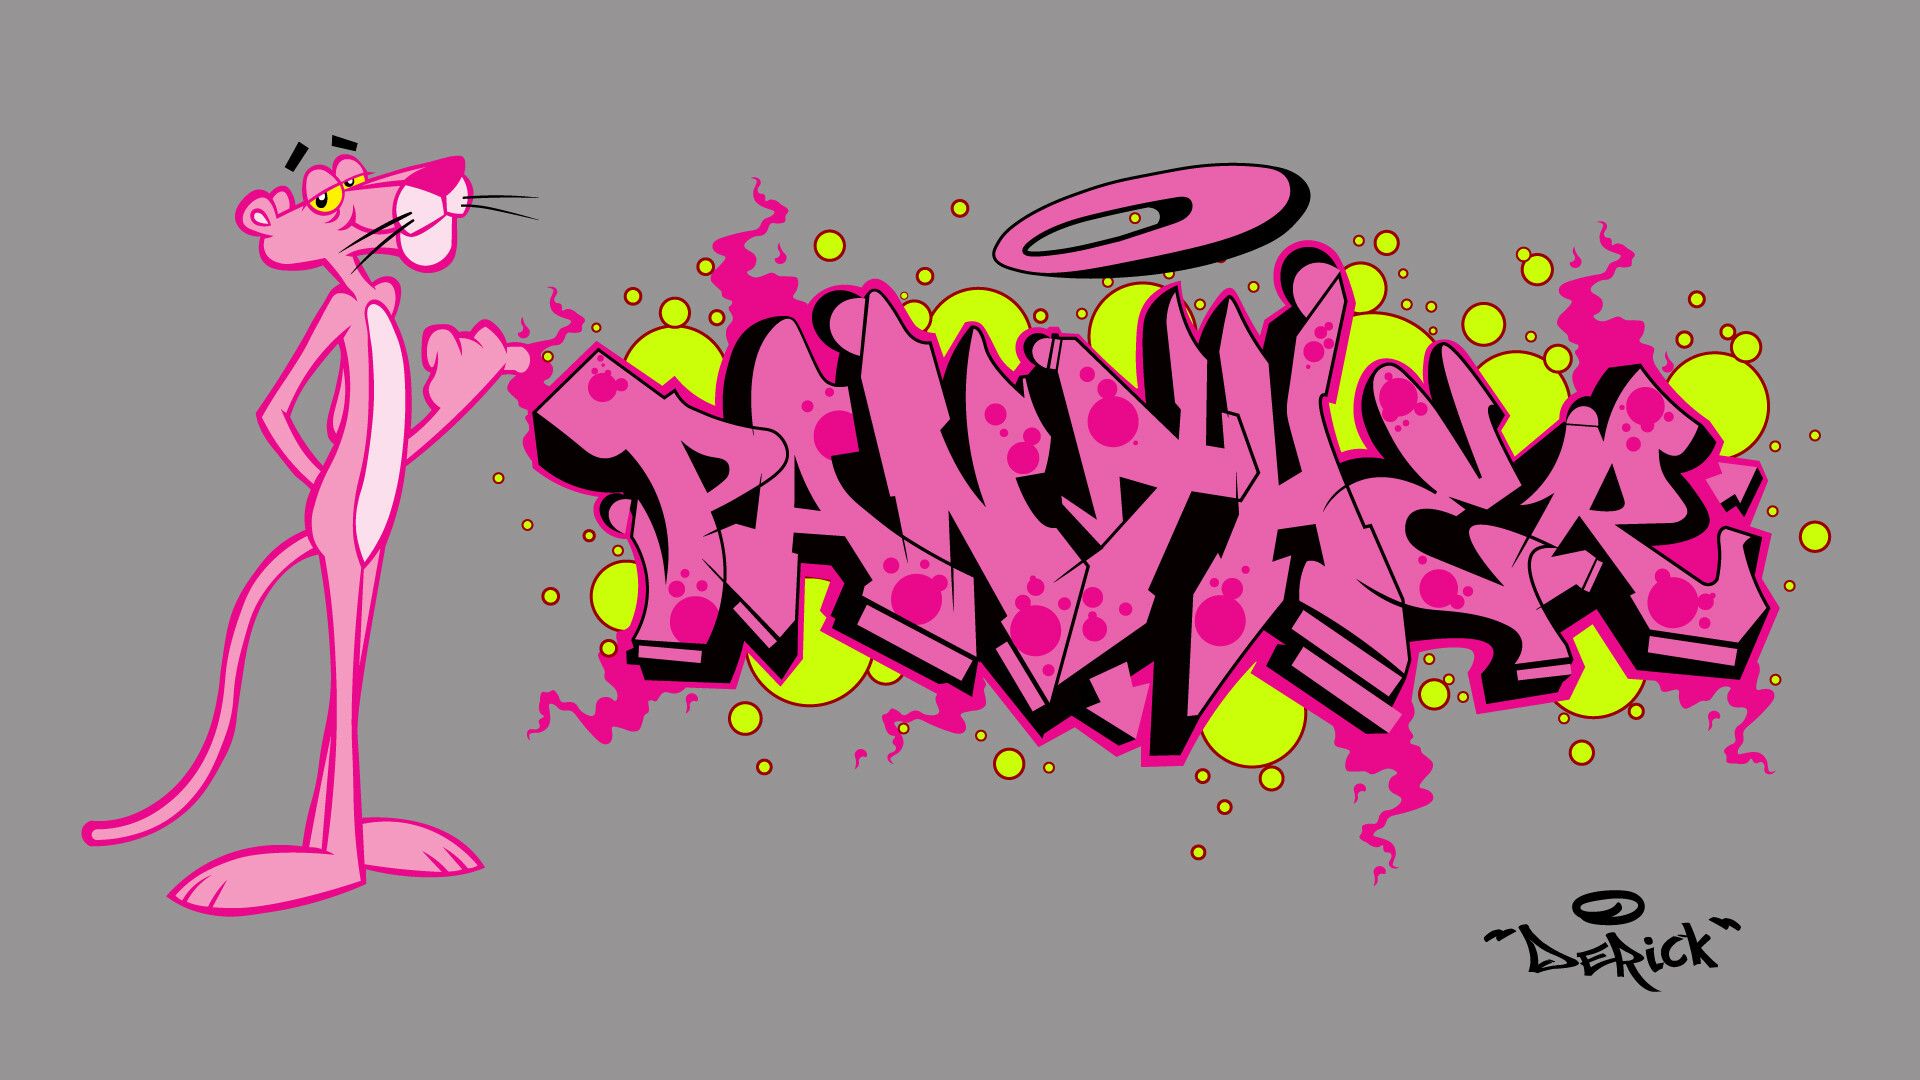 A pink cartoon character with graffiti on it - Pink Panther